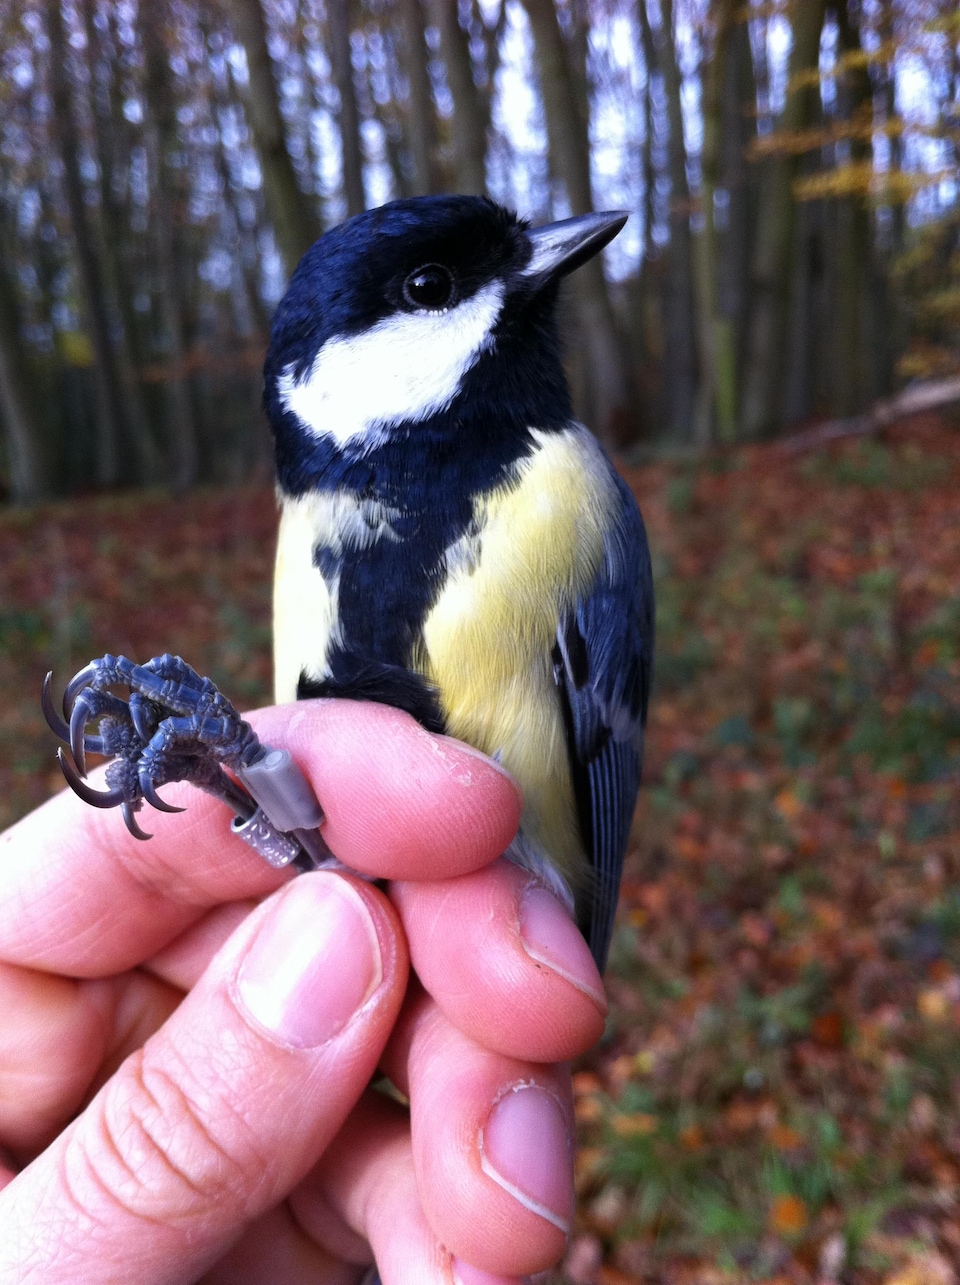 A great tit in the hand of a researcher.